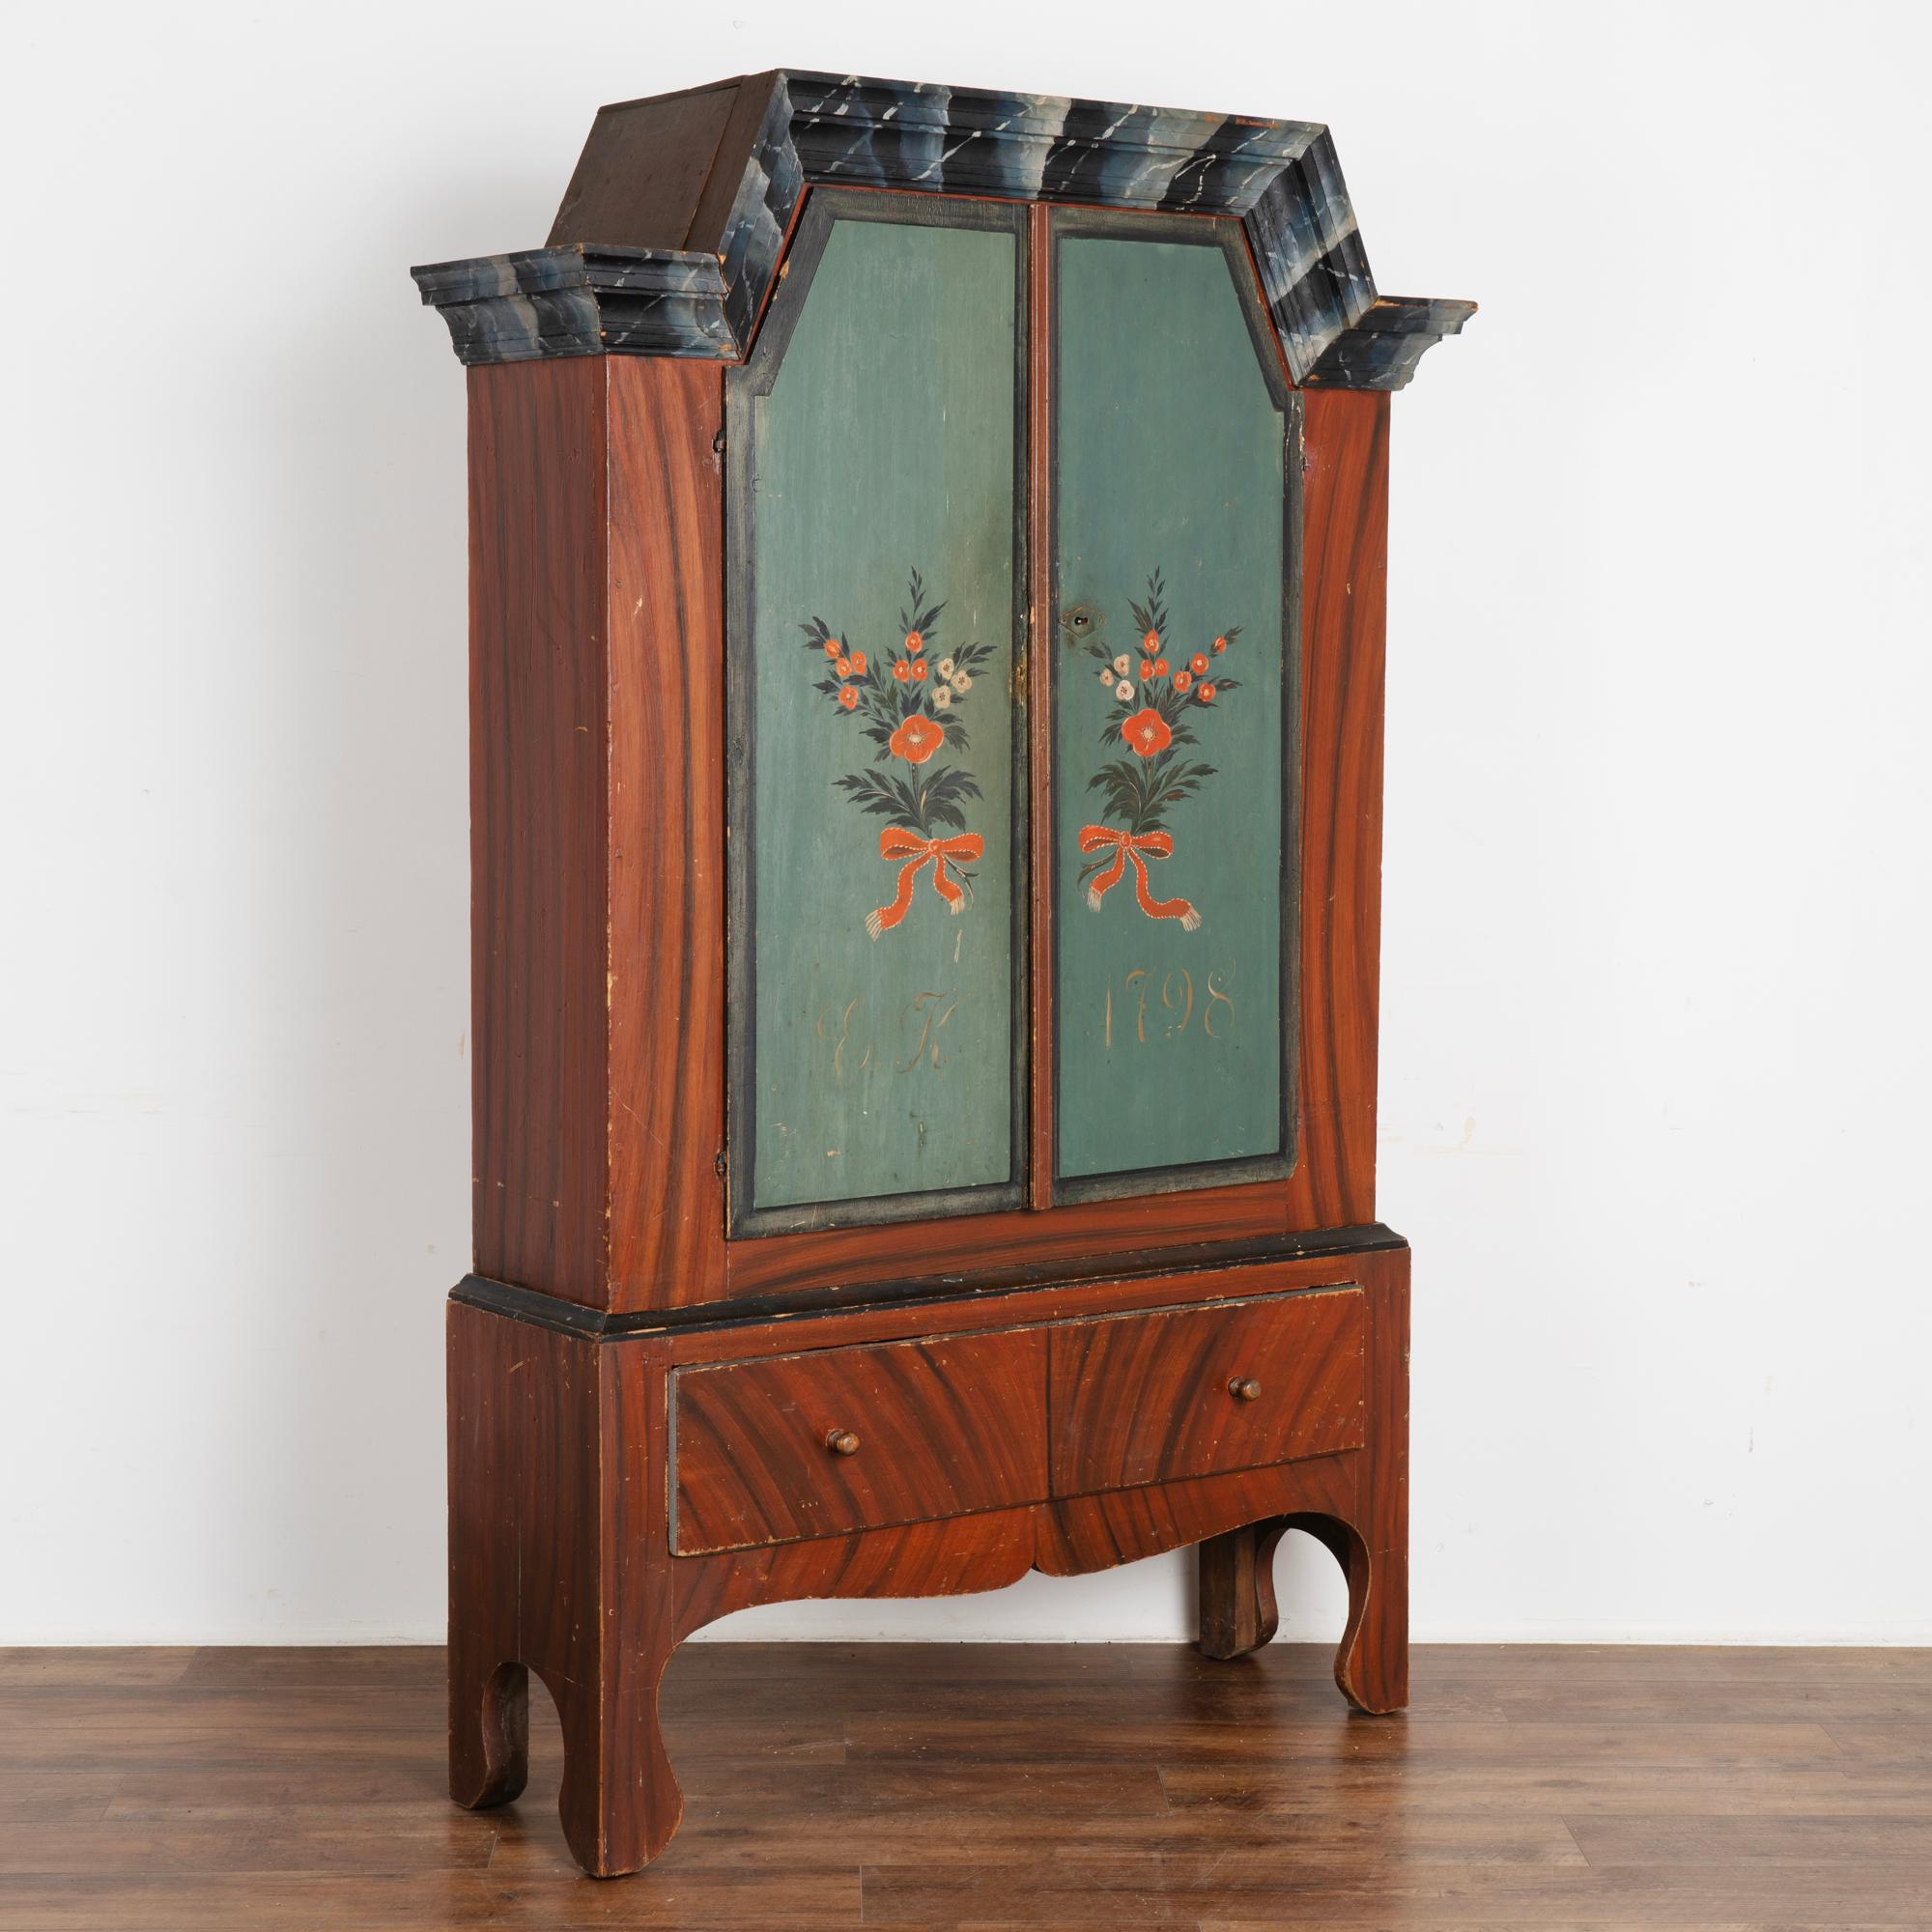 Painted cabinets were a traditional element of Swedish country homes, this one is particularly lovely as it still maintains the original hand-painted finish with floral bouquet and faux wood painted background which was the folk art style of the